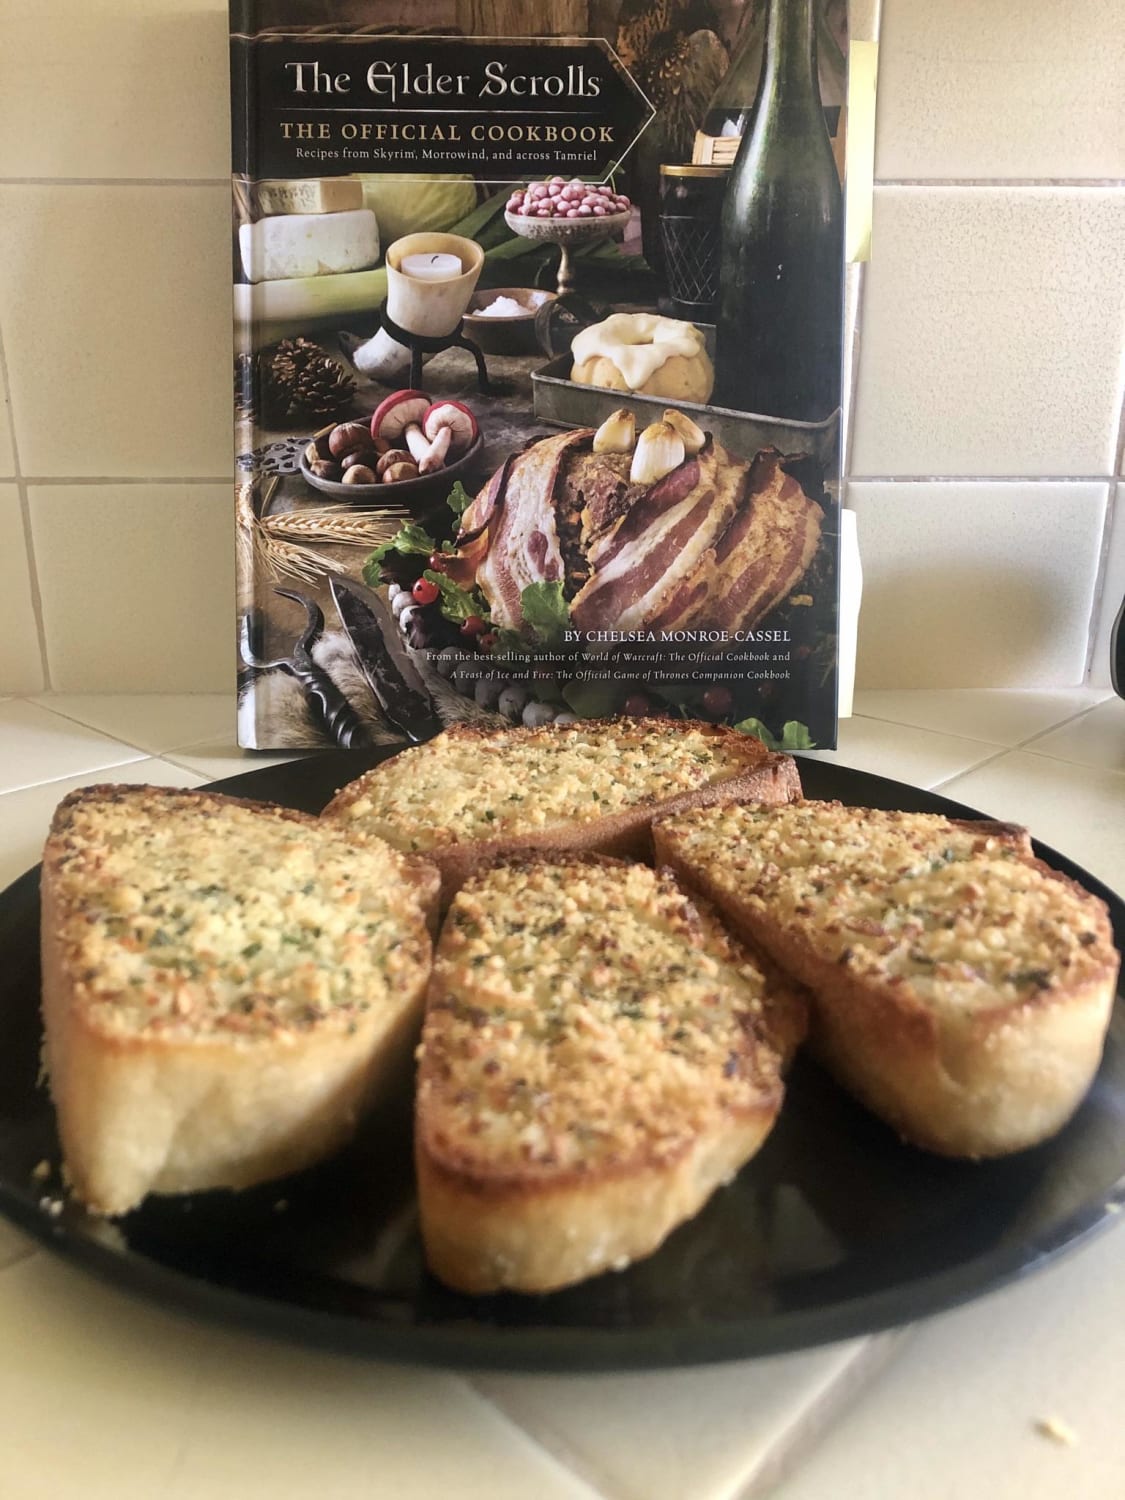 Garlic Bread from the Official cookbook (easiest recipe on there but gotta start somewhere!)